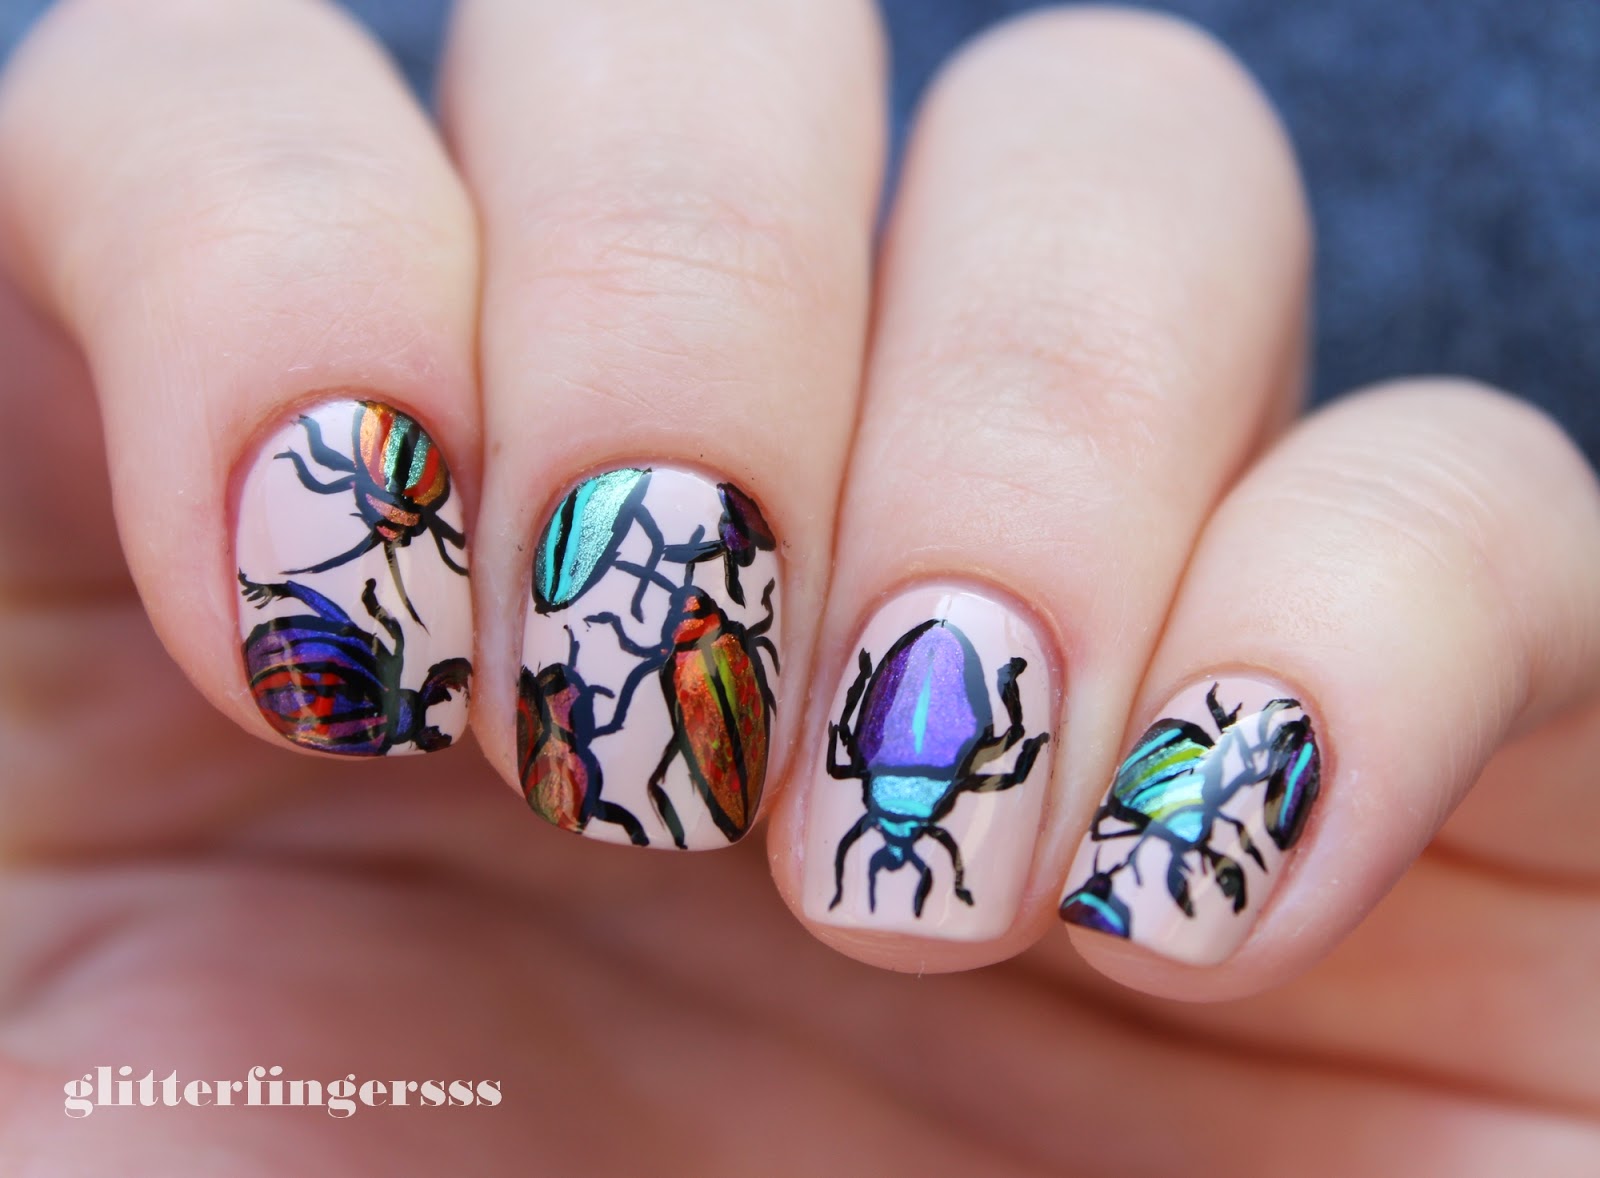 1. "Dead Bug Nail Art" Instagram page - wide 1